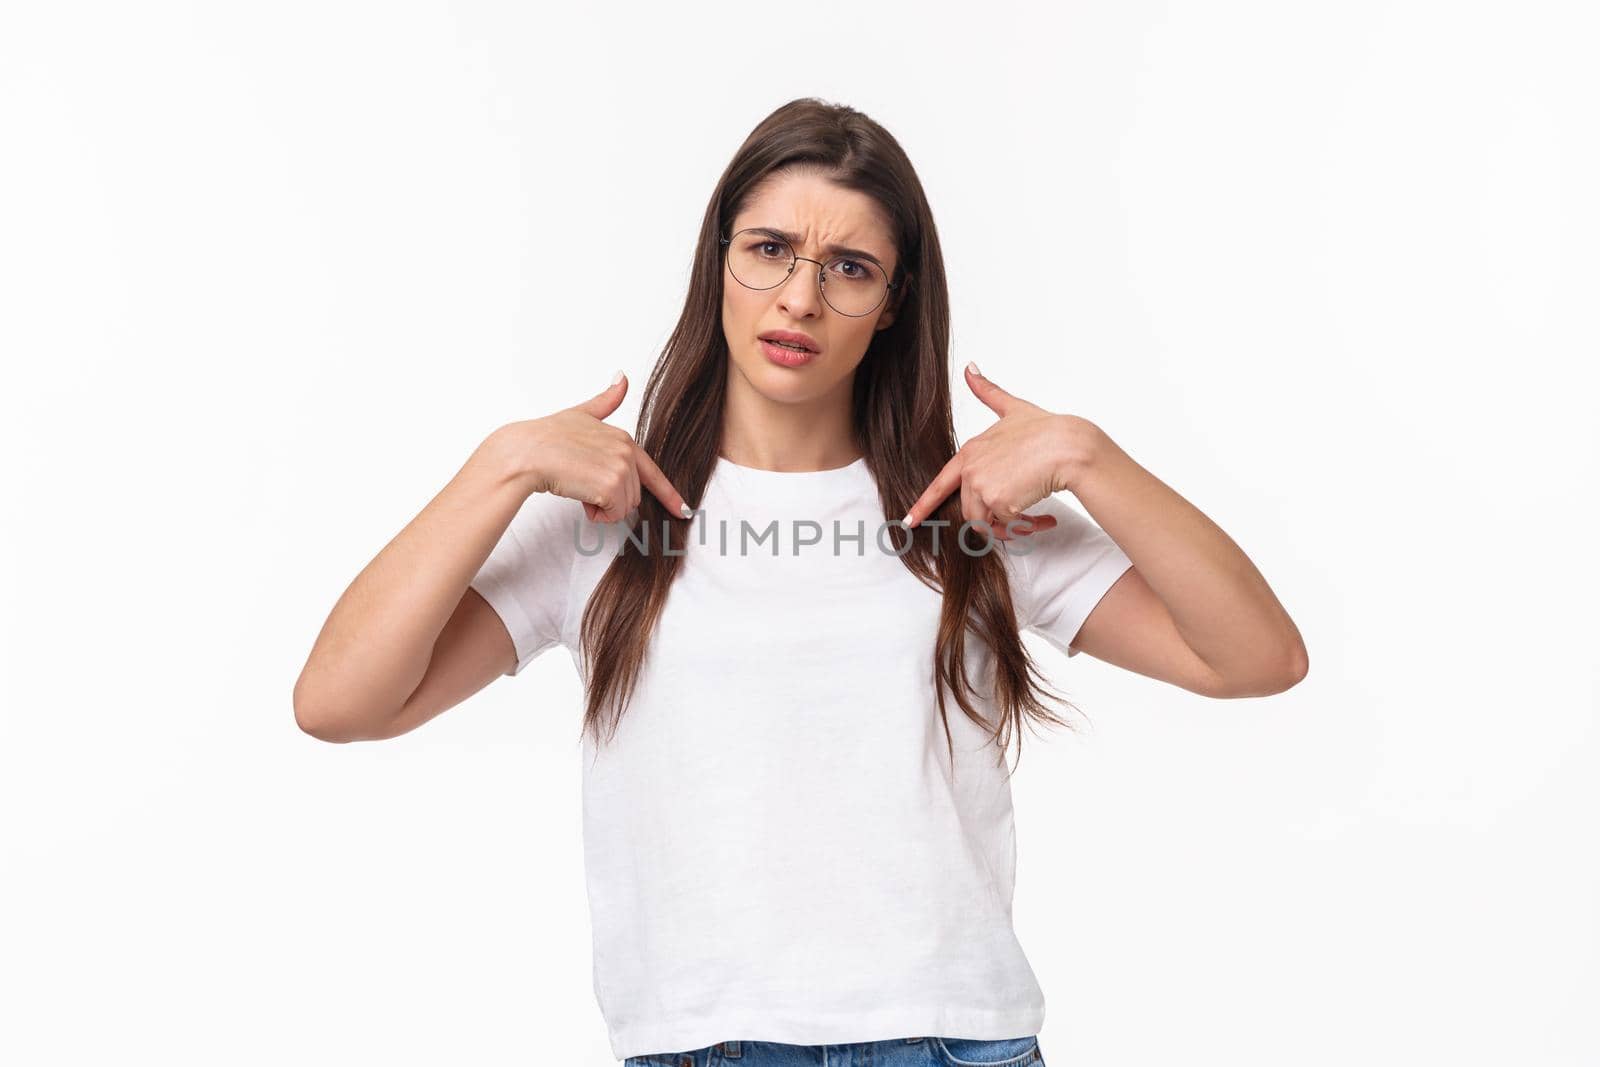 Waist-up portrait of insulted, shocked and offended young frustrated woman pointing at herself, grimace puzzled and confused, cant understand why she was picked or accused by Benzoix